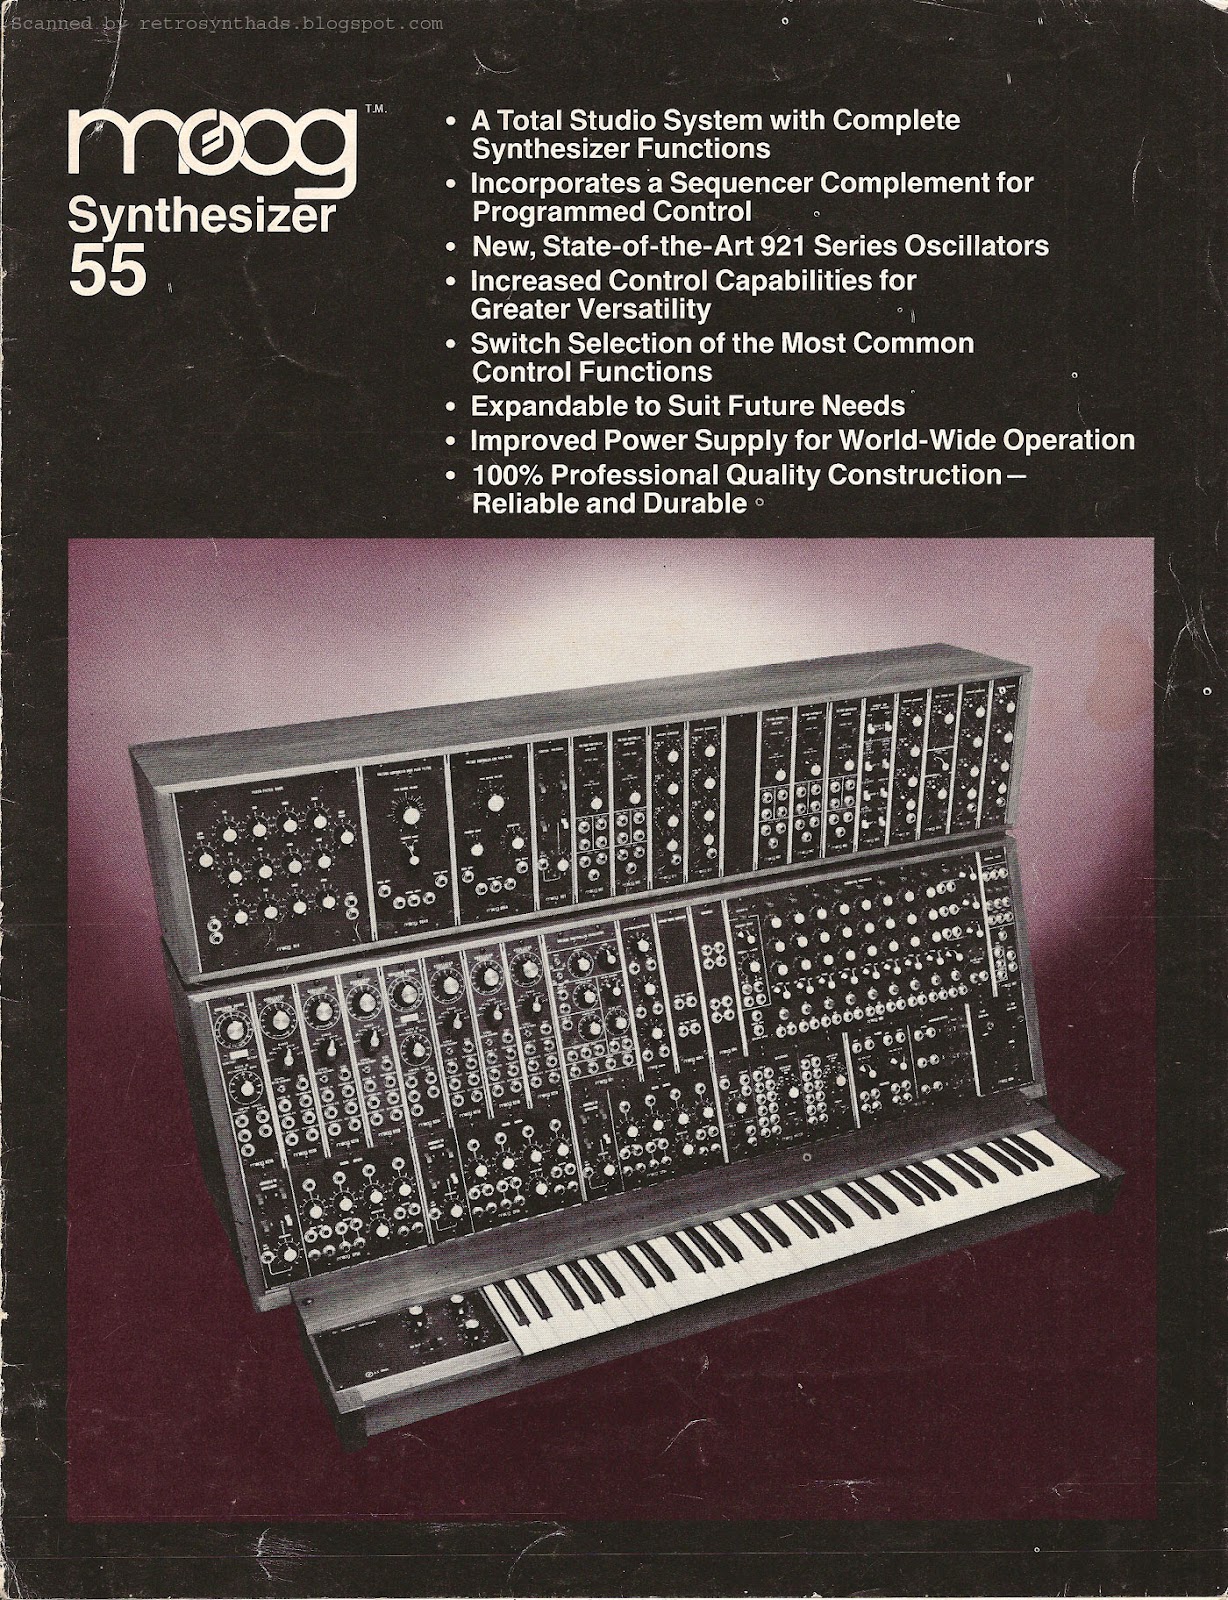 http://retrosynthads.blogspot.ca/2012/05/moog-synthesizer-55-system-six-page.html